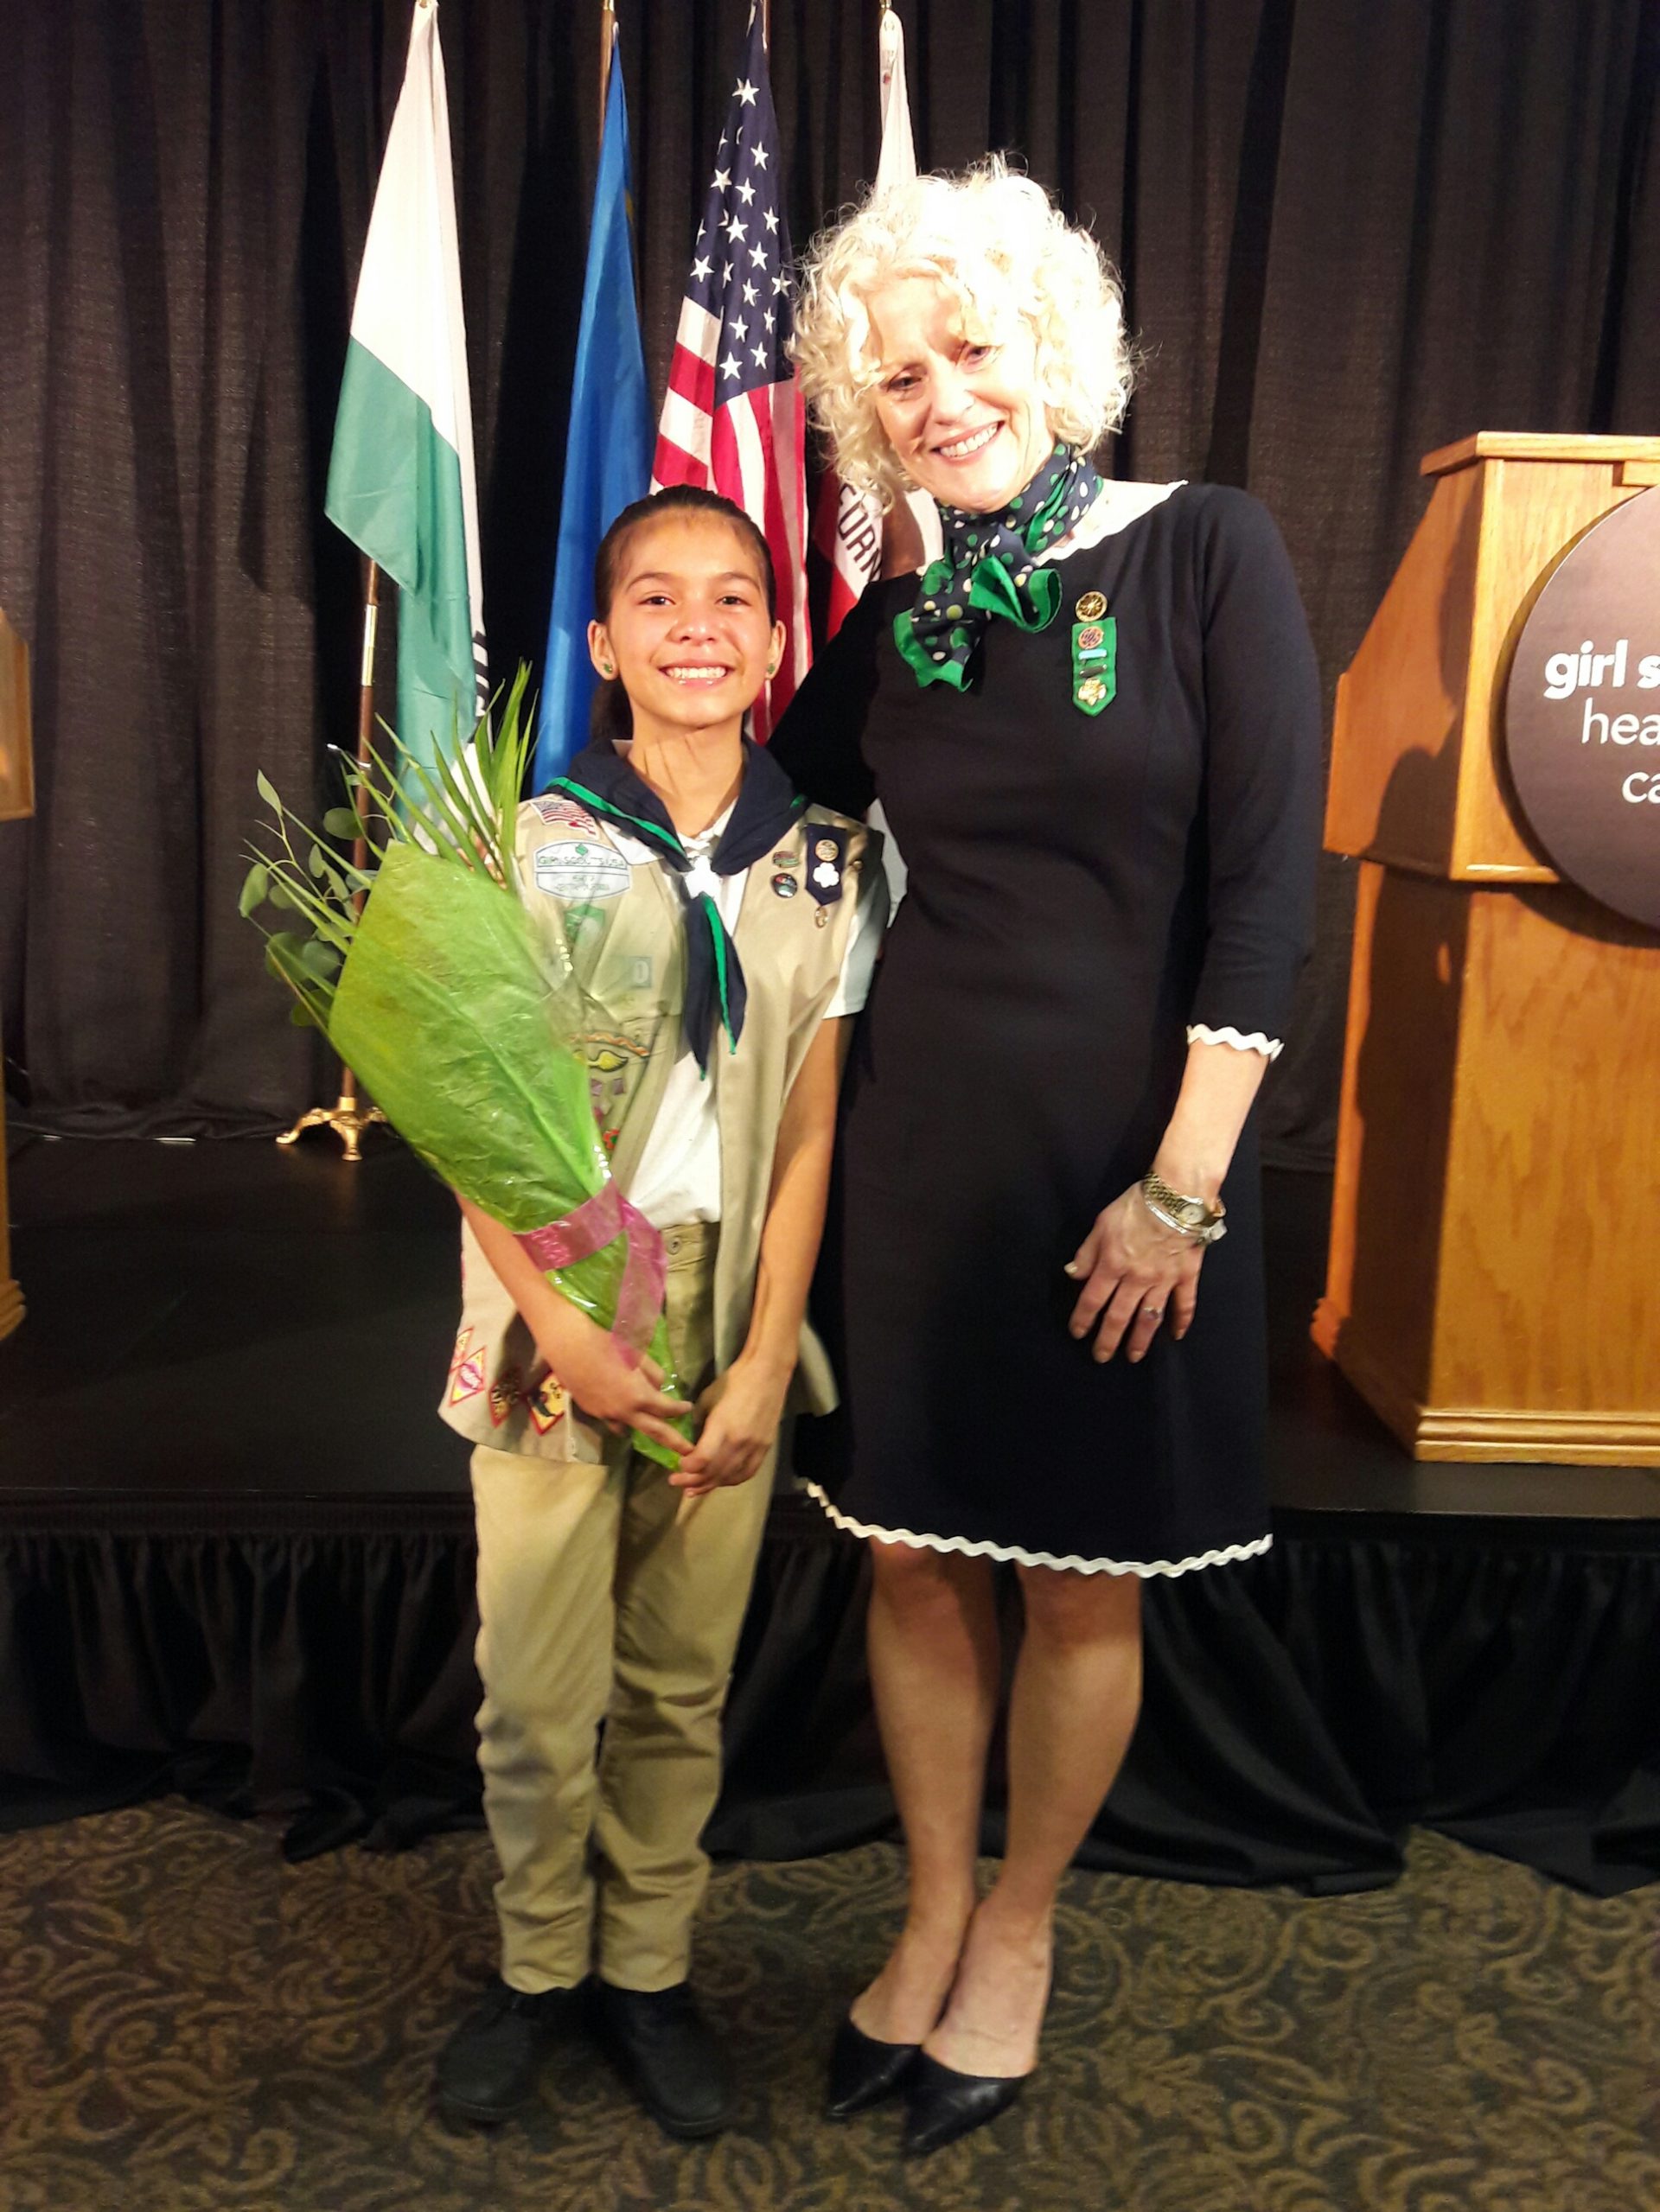 Taylor holding flowers and posing with Girl Scouts Heart of Central California CEO Linda Farley.